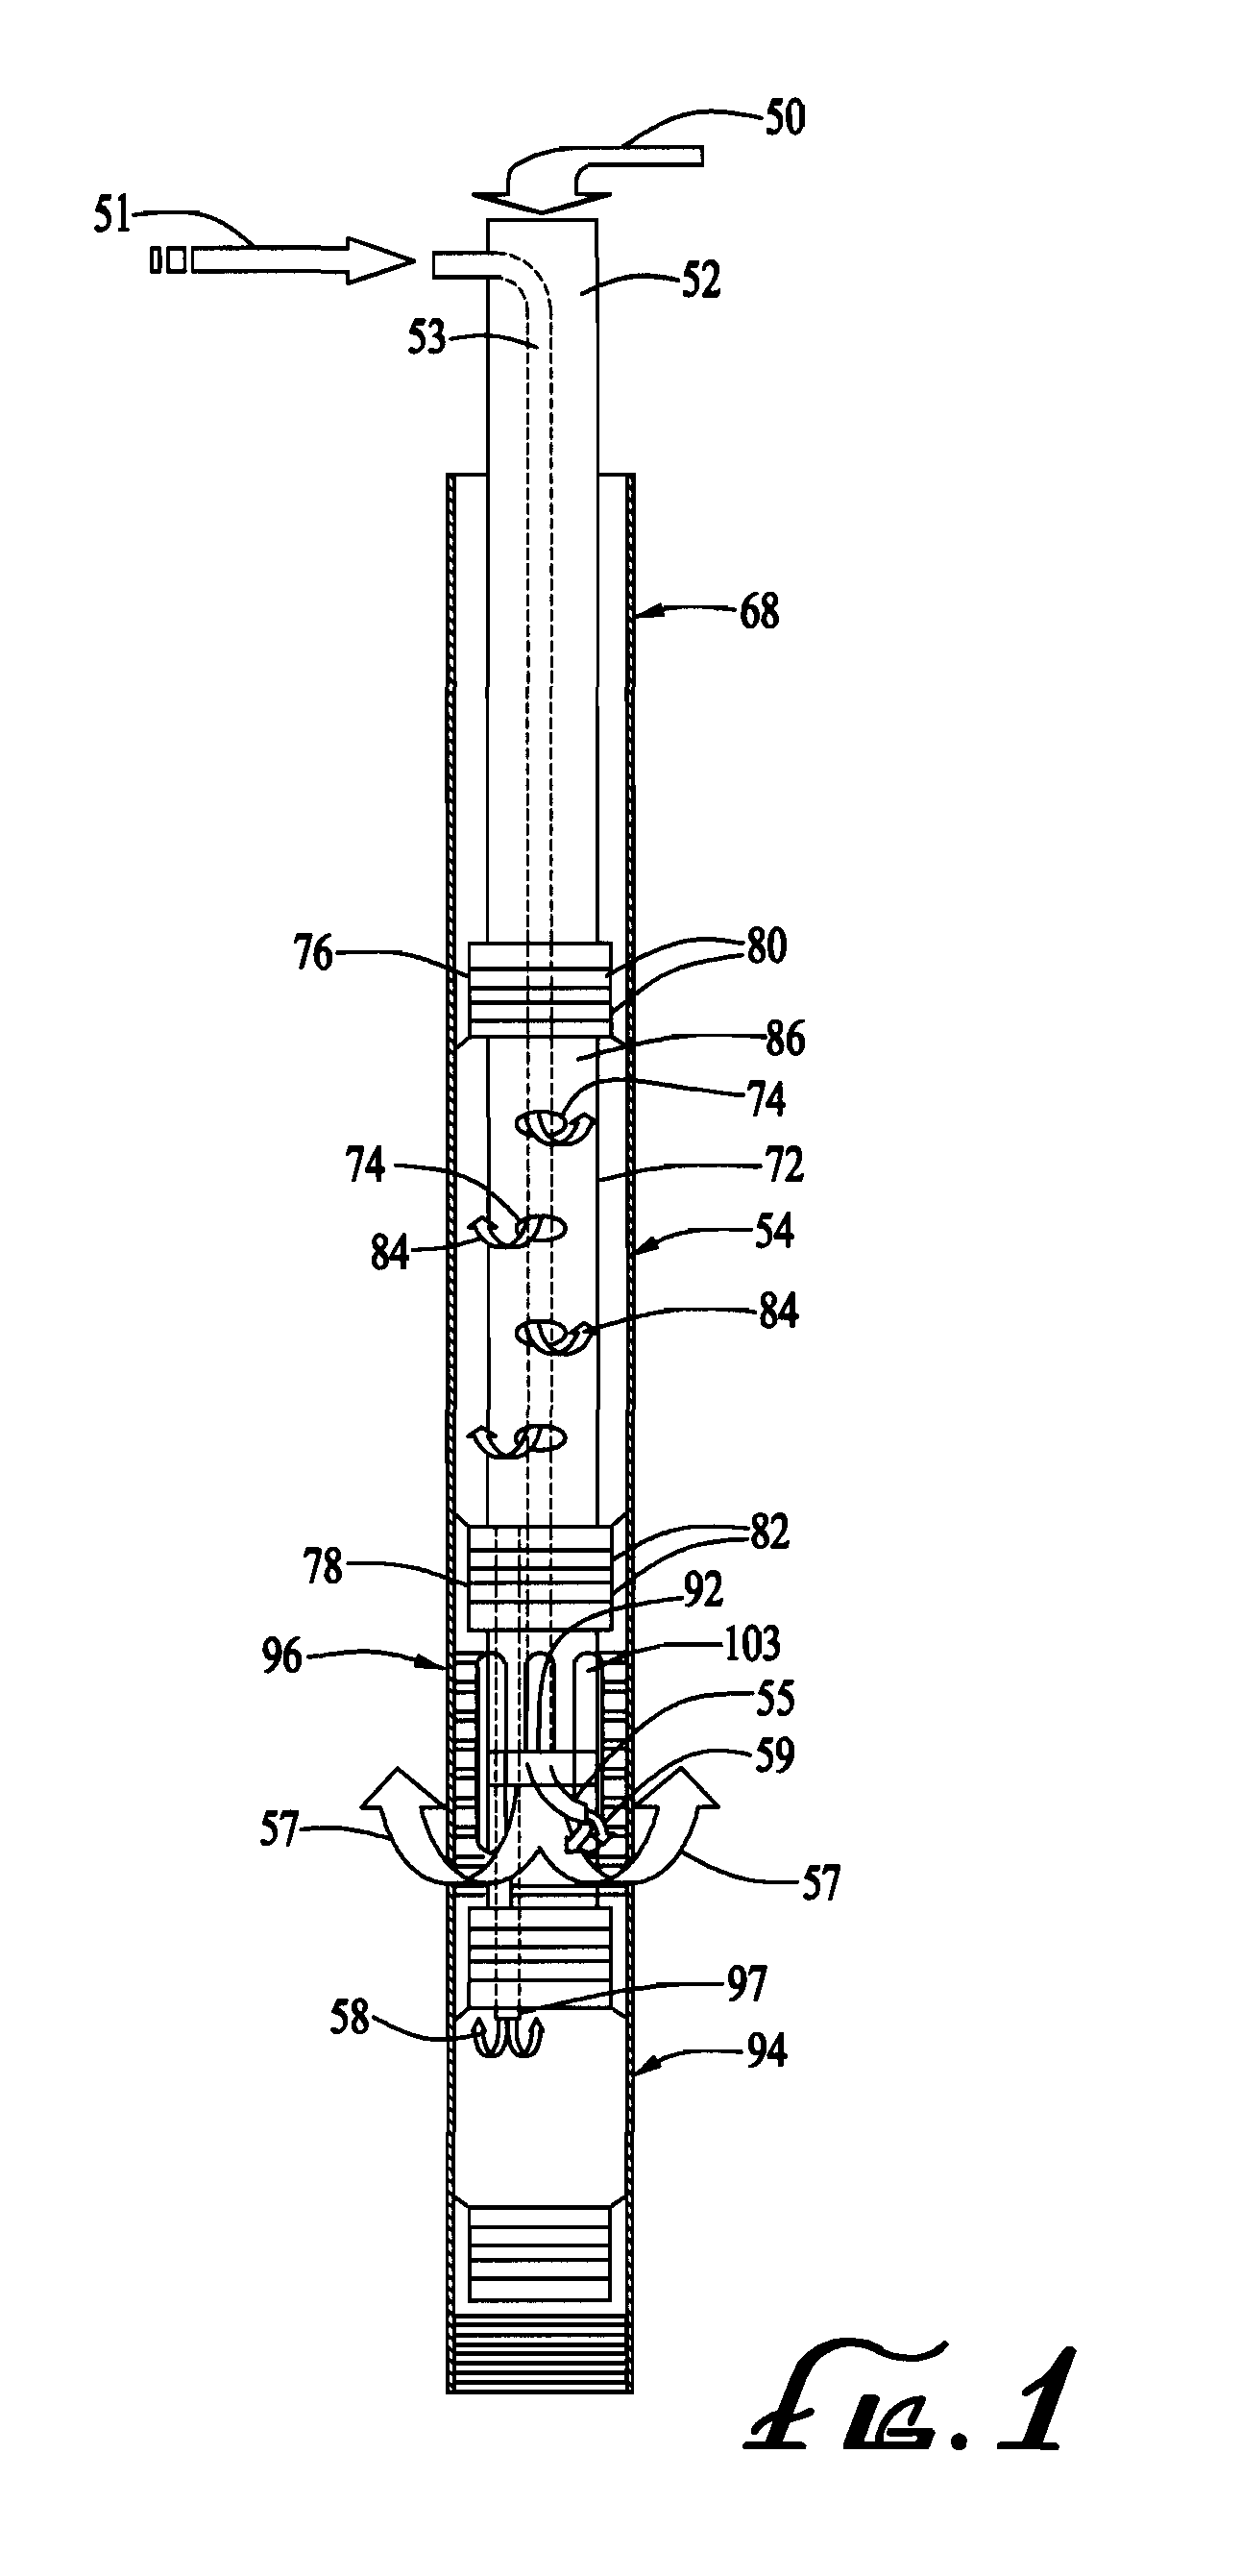 Chemical injection using an adjustable depth air sparging system